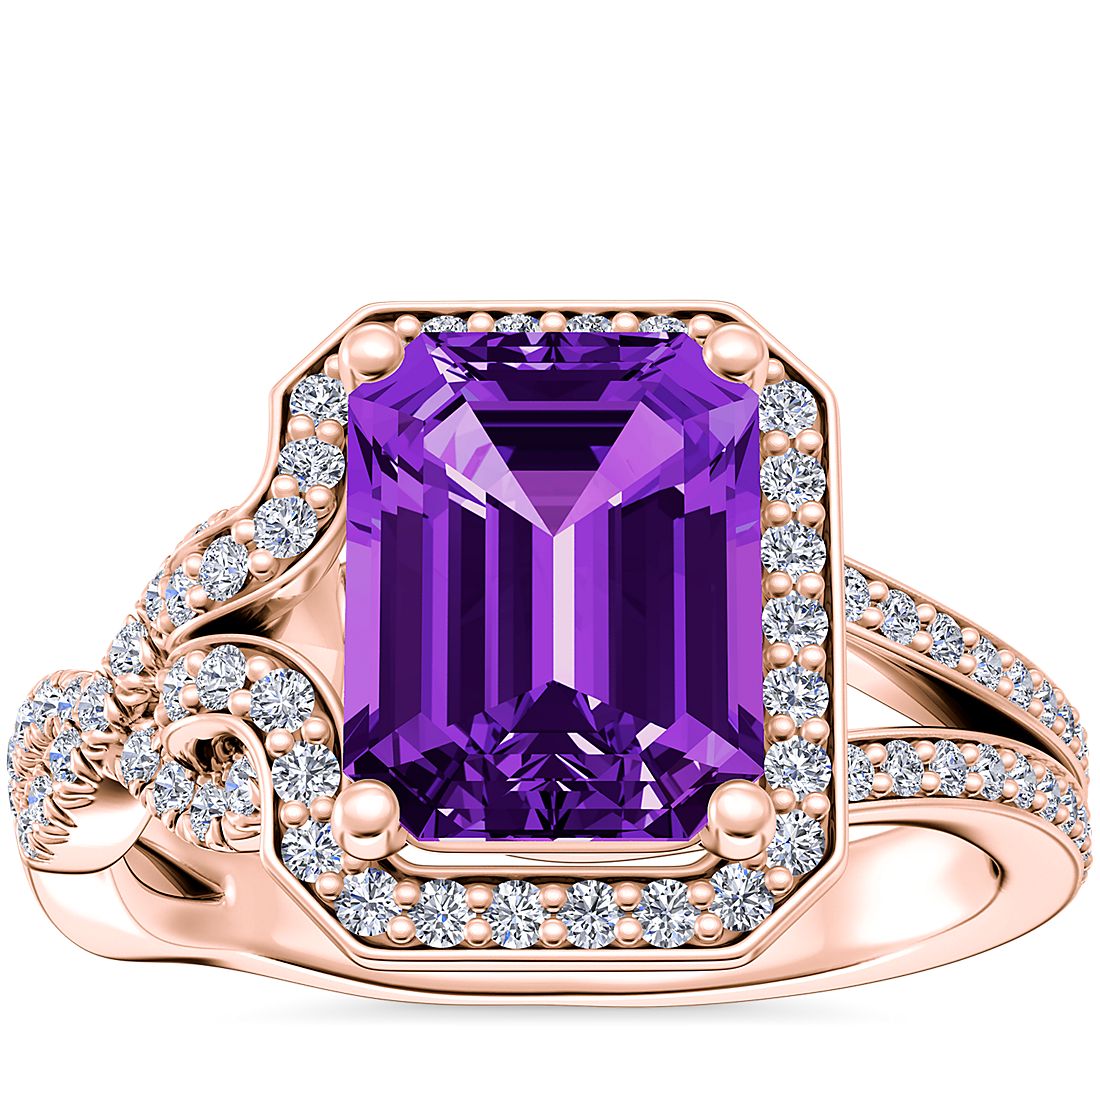 Asymmetrical Diamond Infinity Halo Engagement Ring with Emerald-Cut Amethyst in 18k Rose Gold (9x7mm)